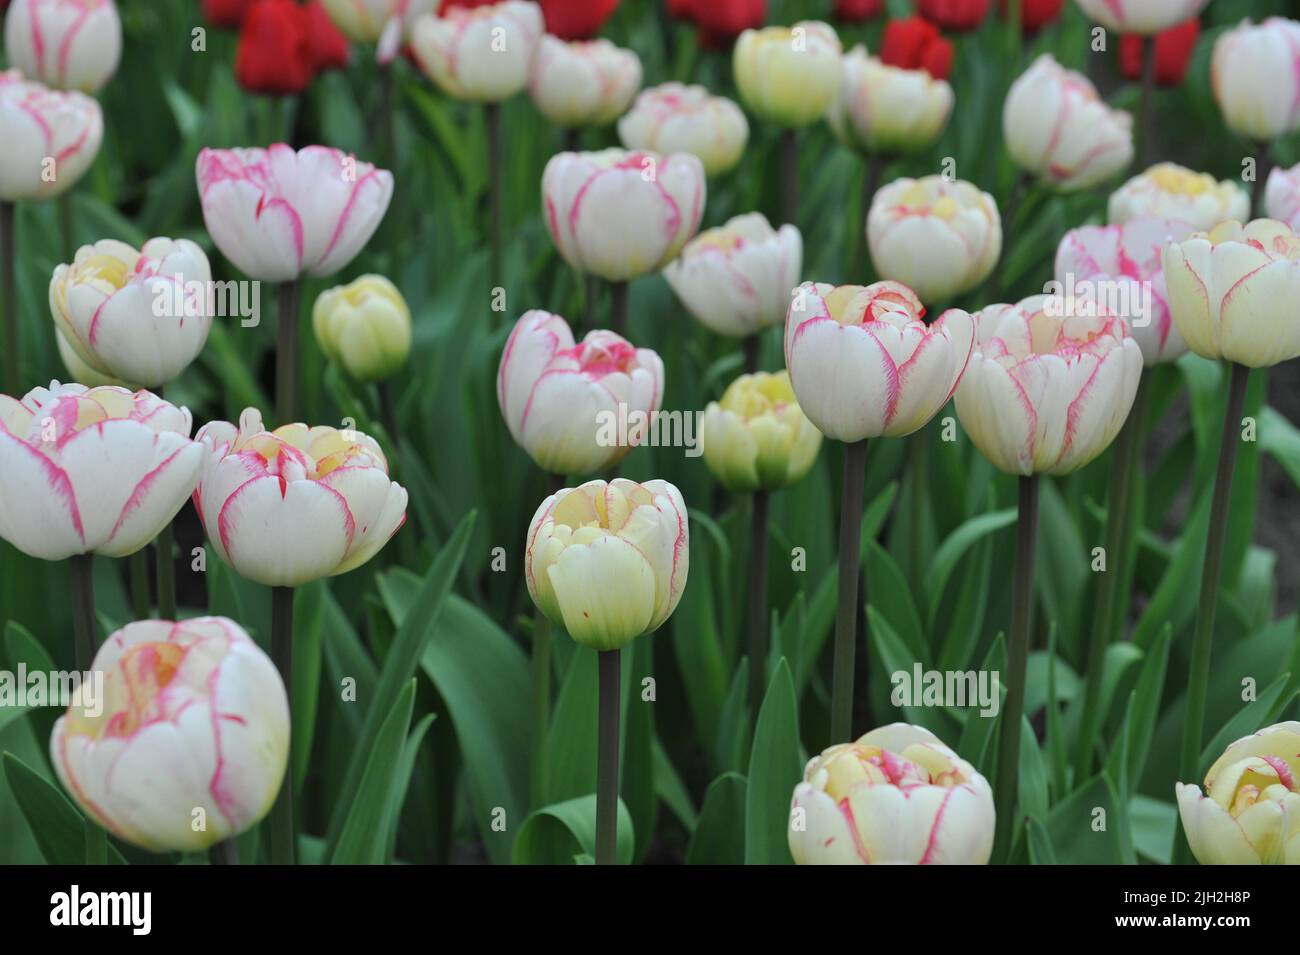 Pink and white Double Late tulips (Tulipa) Pioen Rose bloom in a garden in March Stock Photo